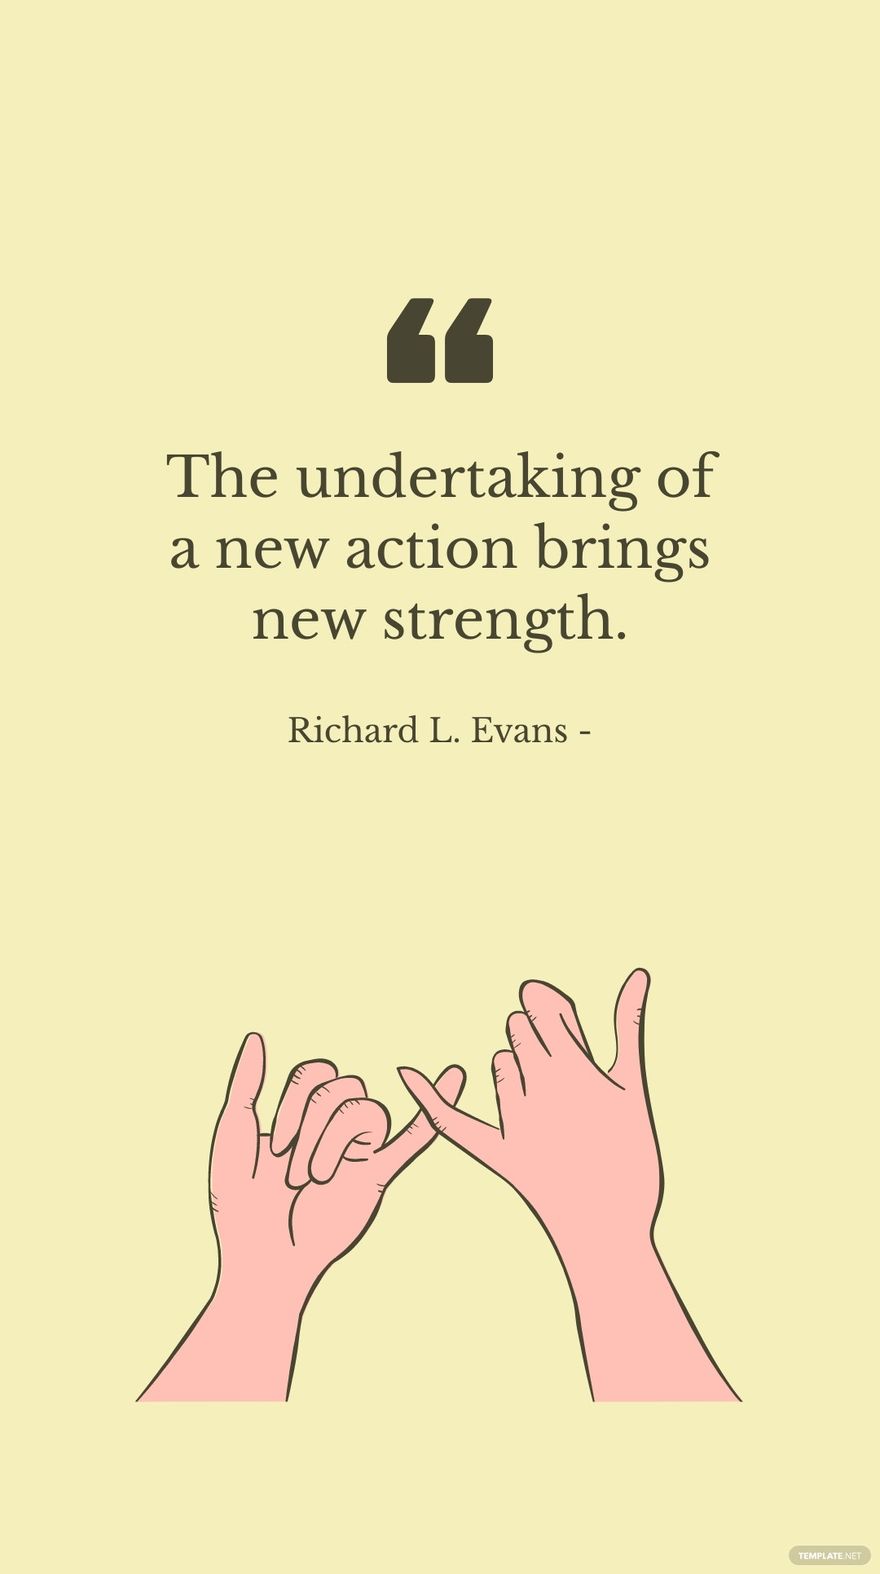 Richard L. Evans - The undertaking of a new action brings new strength. in JPG